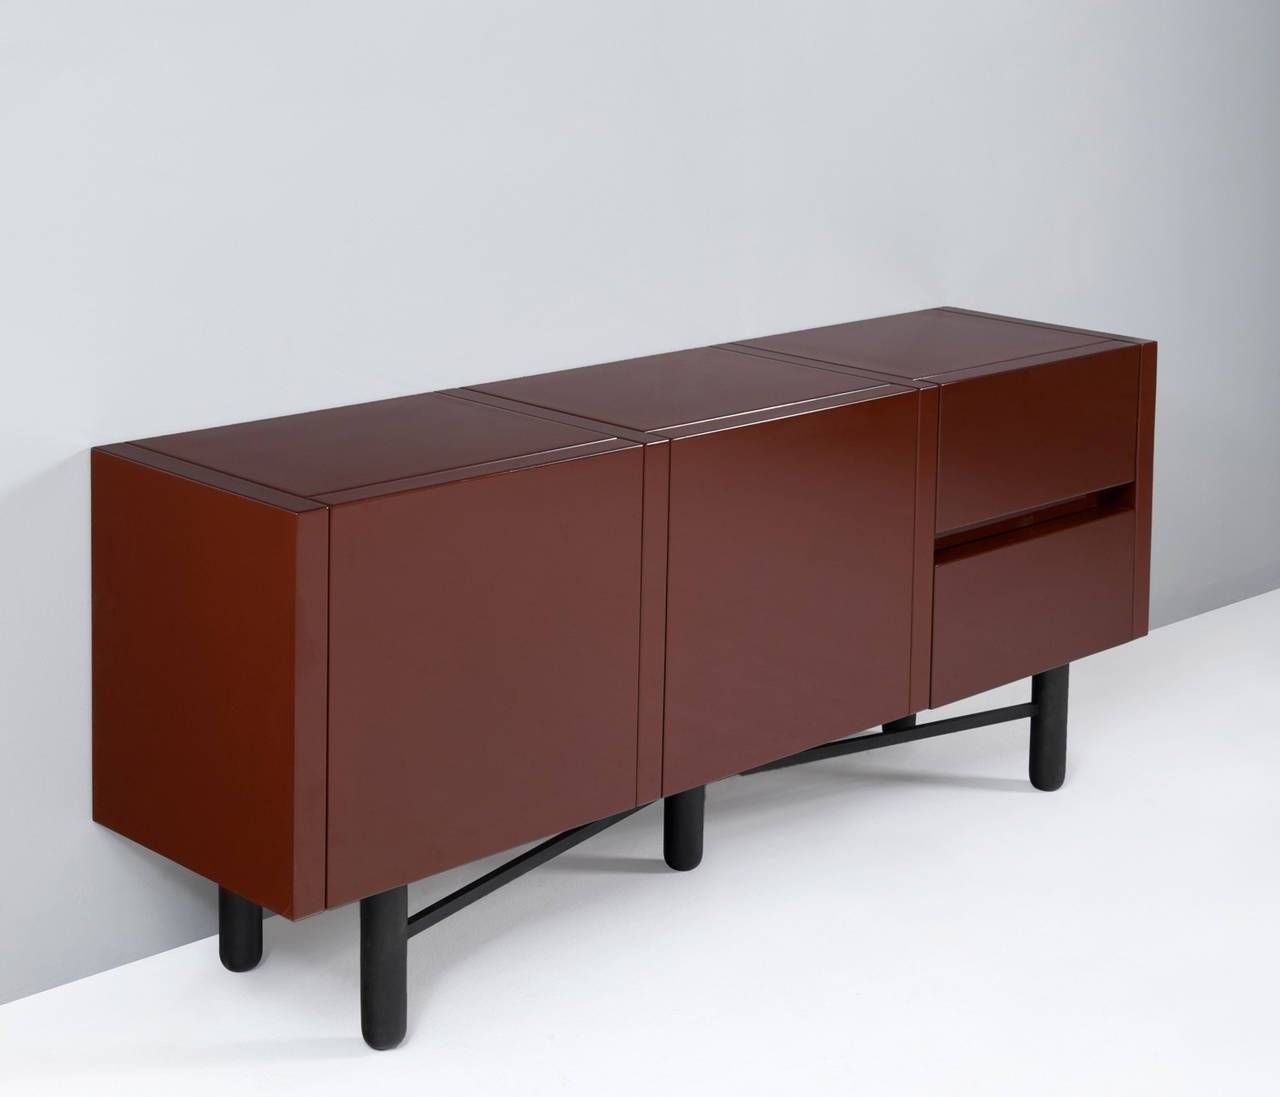 Roche Bobois Red Lacquered High Gloss Sideboard For Sale At 1stdibs In White High Gloss Sideboards (View 9 of 15)